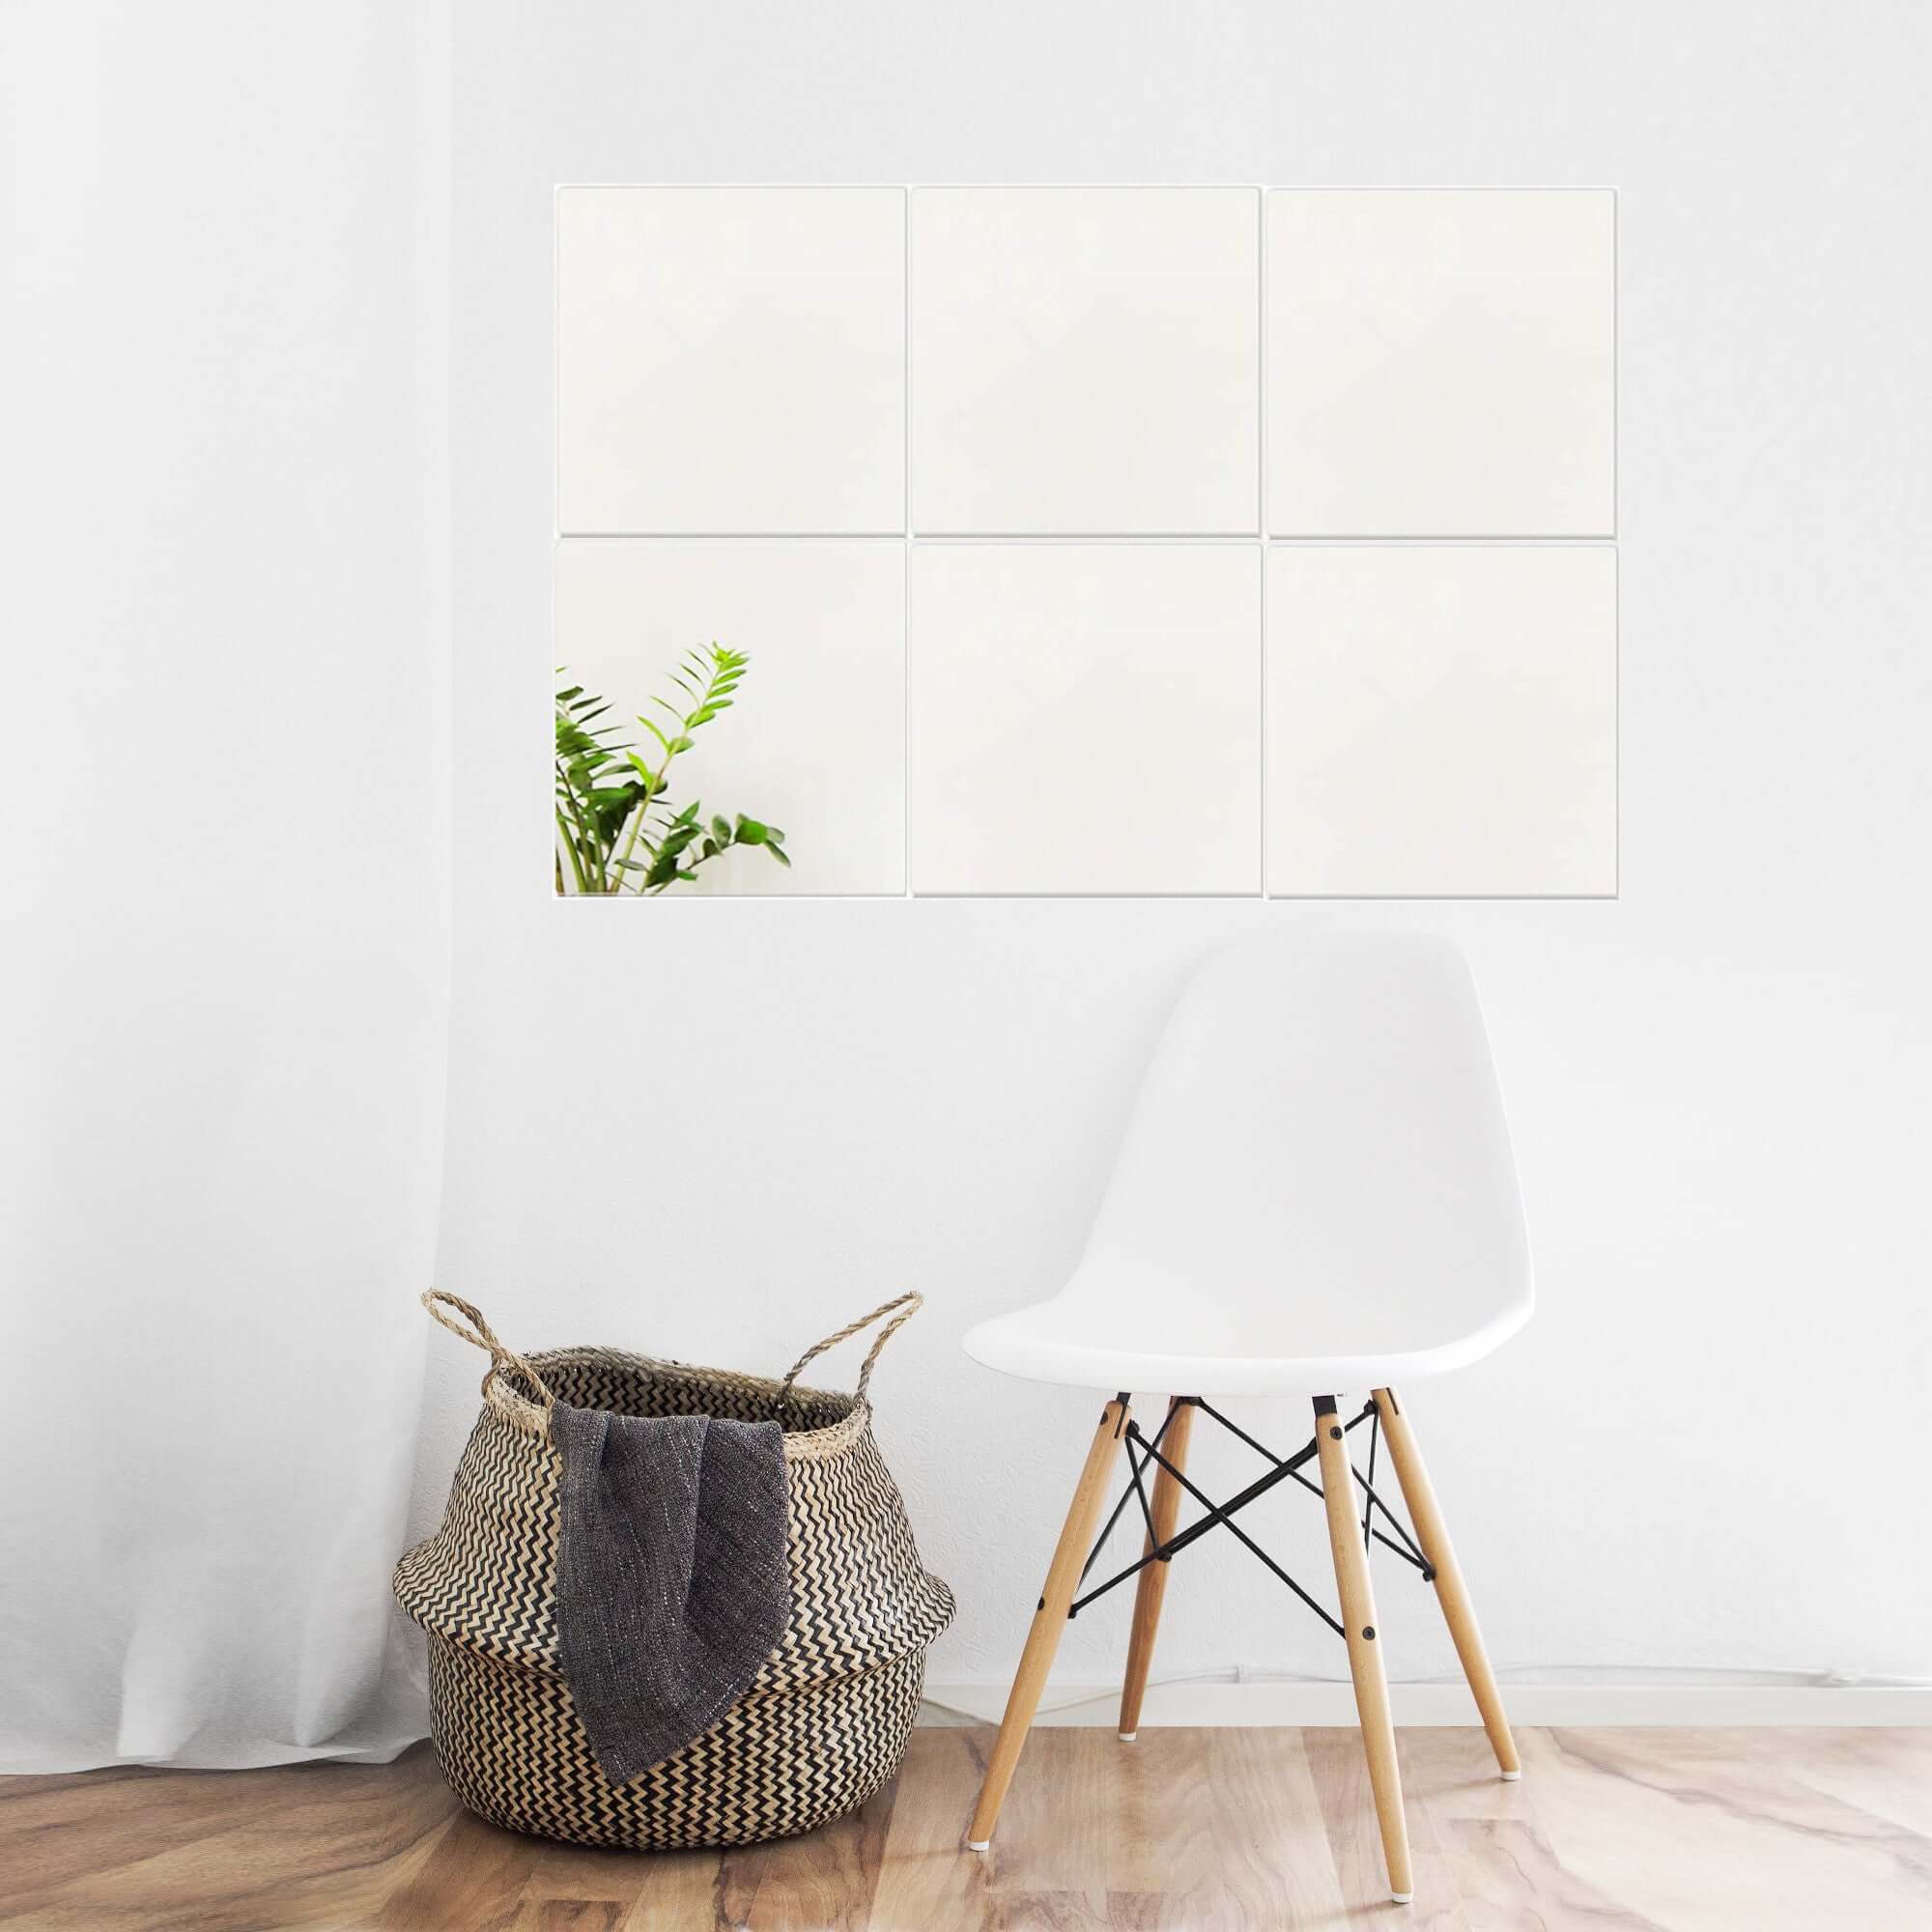 Kendall Self-Adhesive Silver Glass Mirror Tiles, Use as Full length Mirror  or Create your own Shape, Set of 6 Square Silver Mirrored Tiles, 260 x  260mm per tile at £13.00 only - Enki